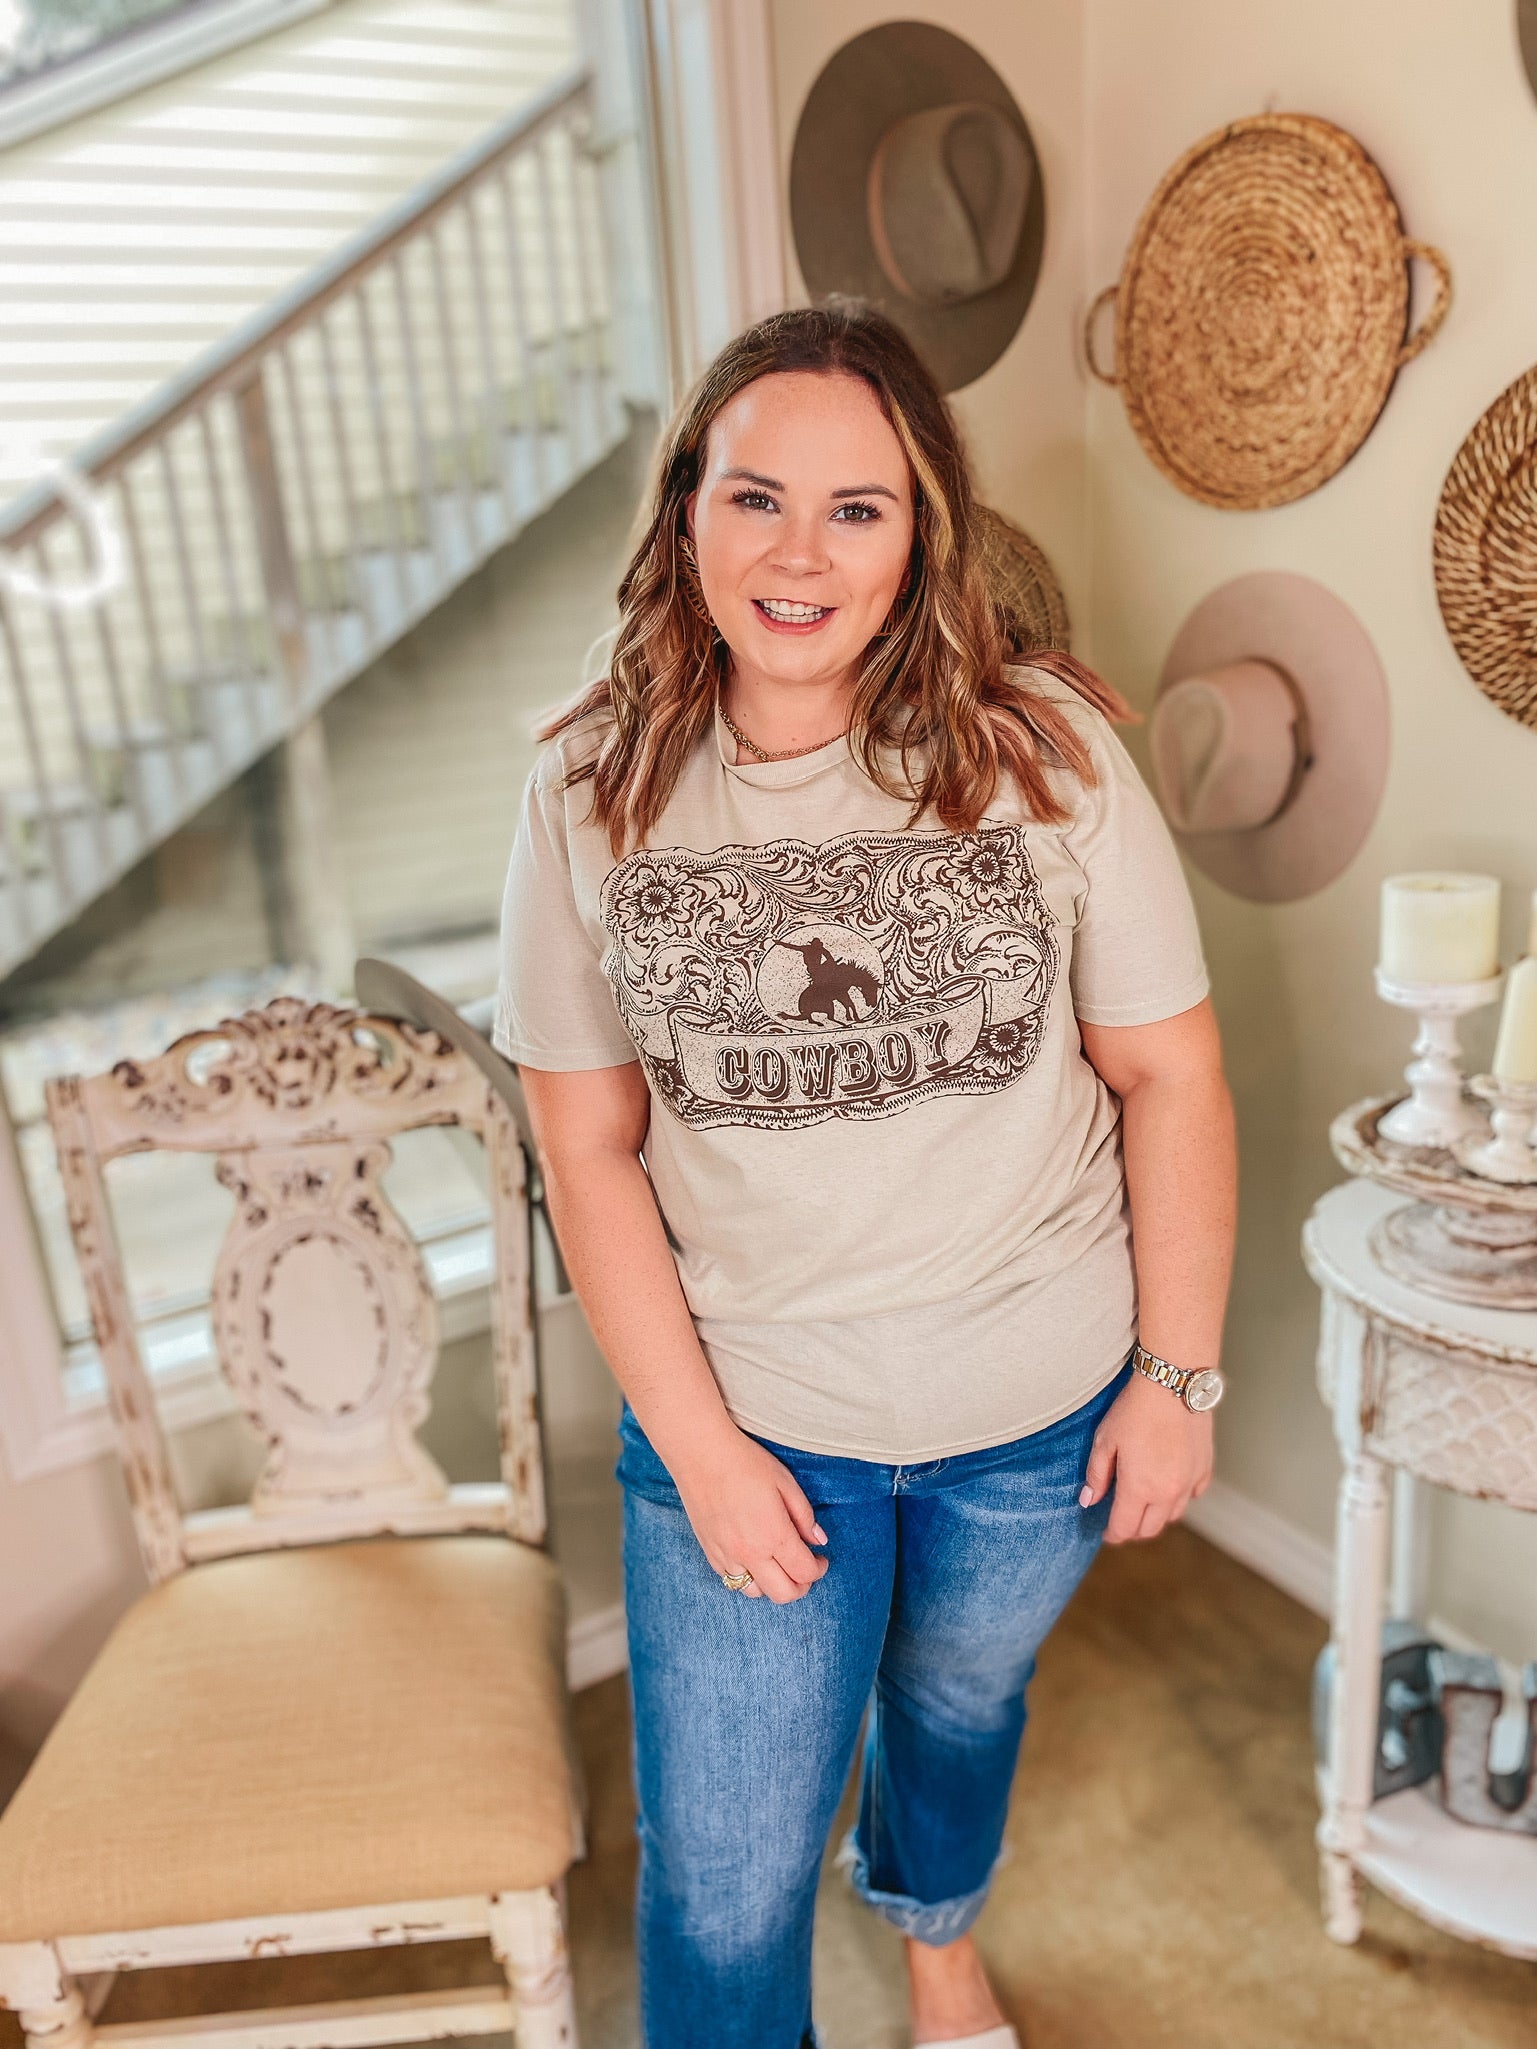 Cowboy Buckle Short Sleeve Graphic Tee in Beige - Giddy Up Glamour Boutique